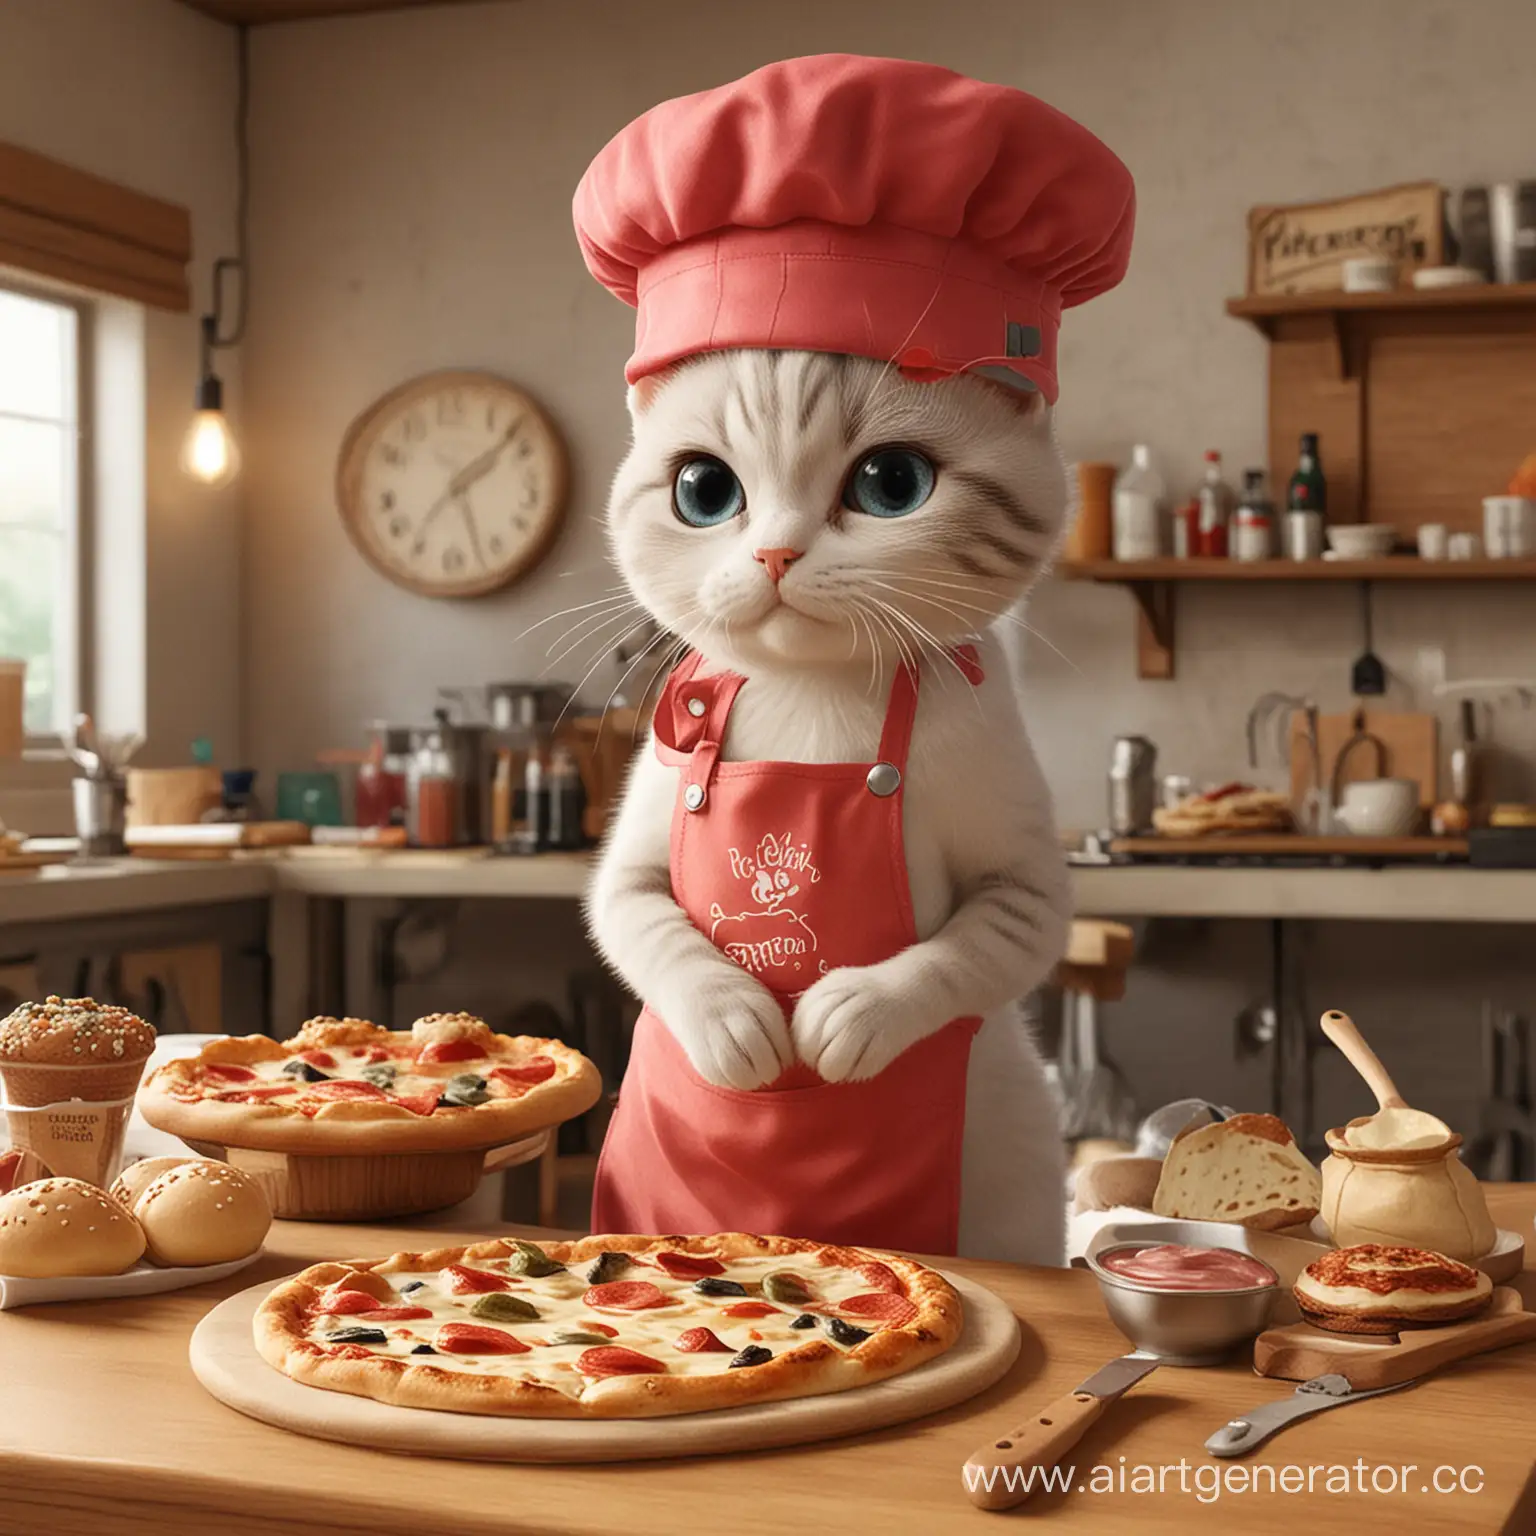 Adorable-Kitten-Baker-Making-Pizza-in-a-Cozy-Pizzeria-Setting